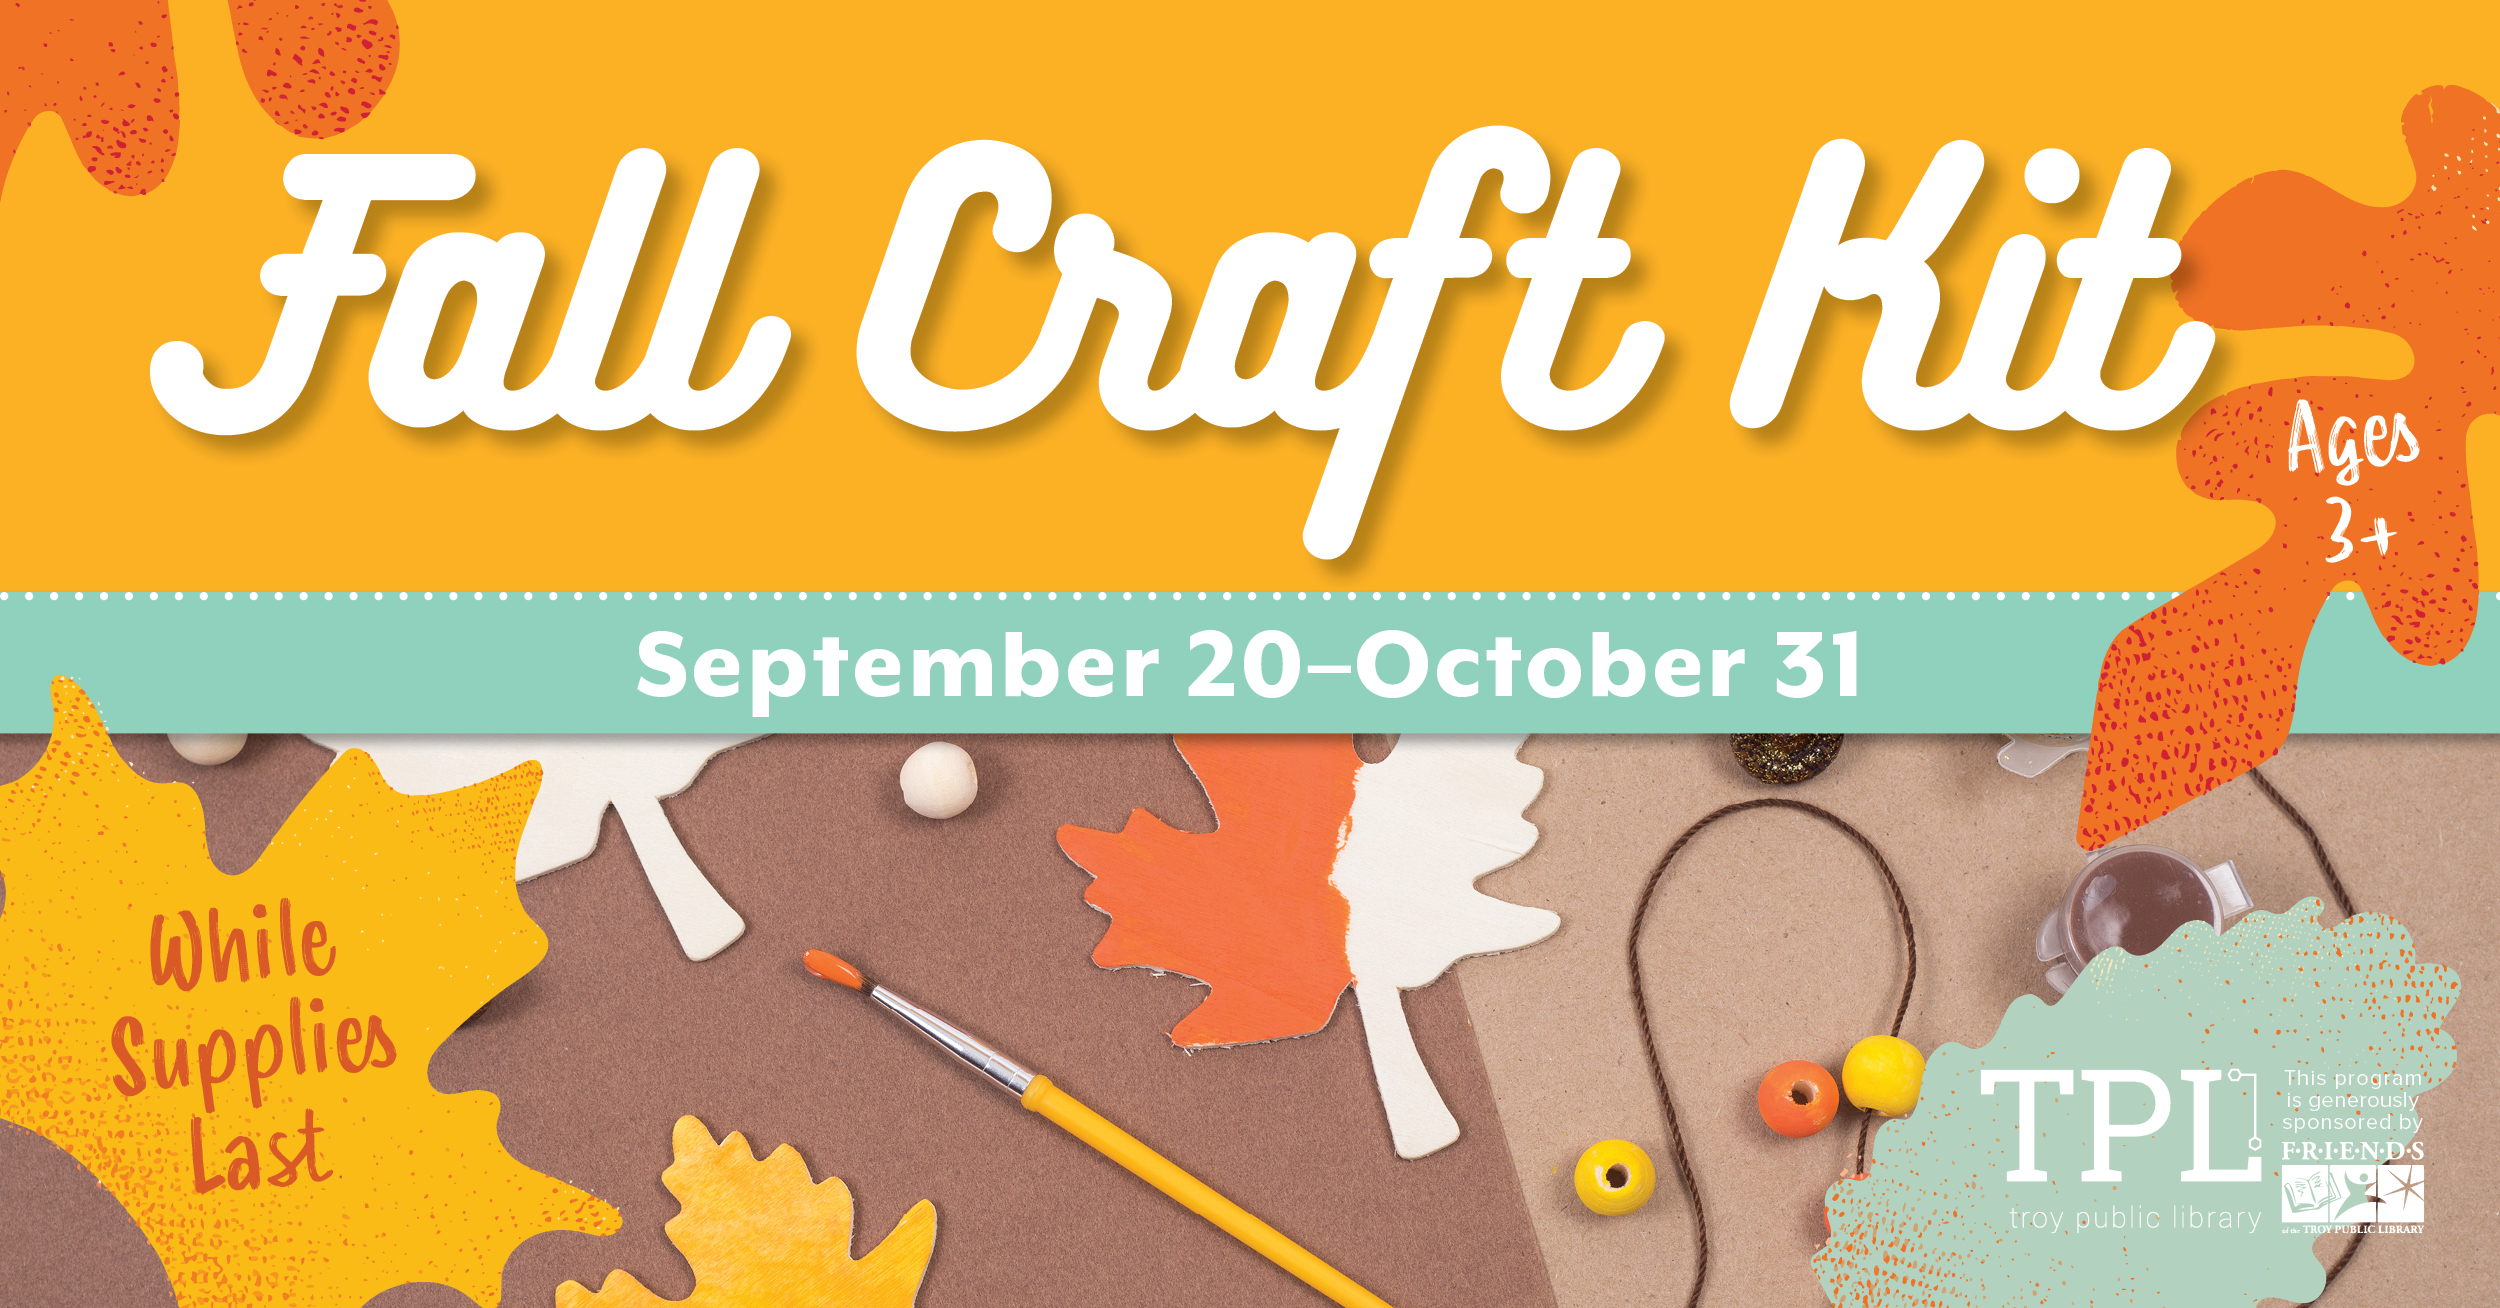 Fall Craft Kit. Ages 3 and up. September 20 to October 31. While Supplies Last. Sponsored by the Friends of the Troy Public Library. 